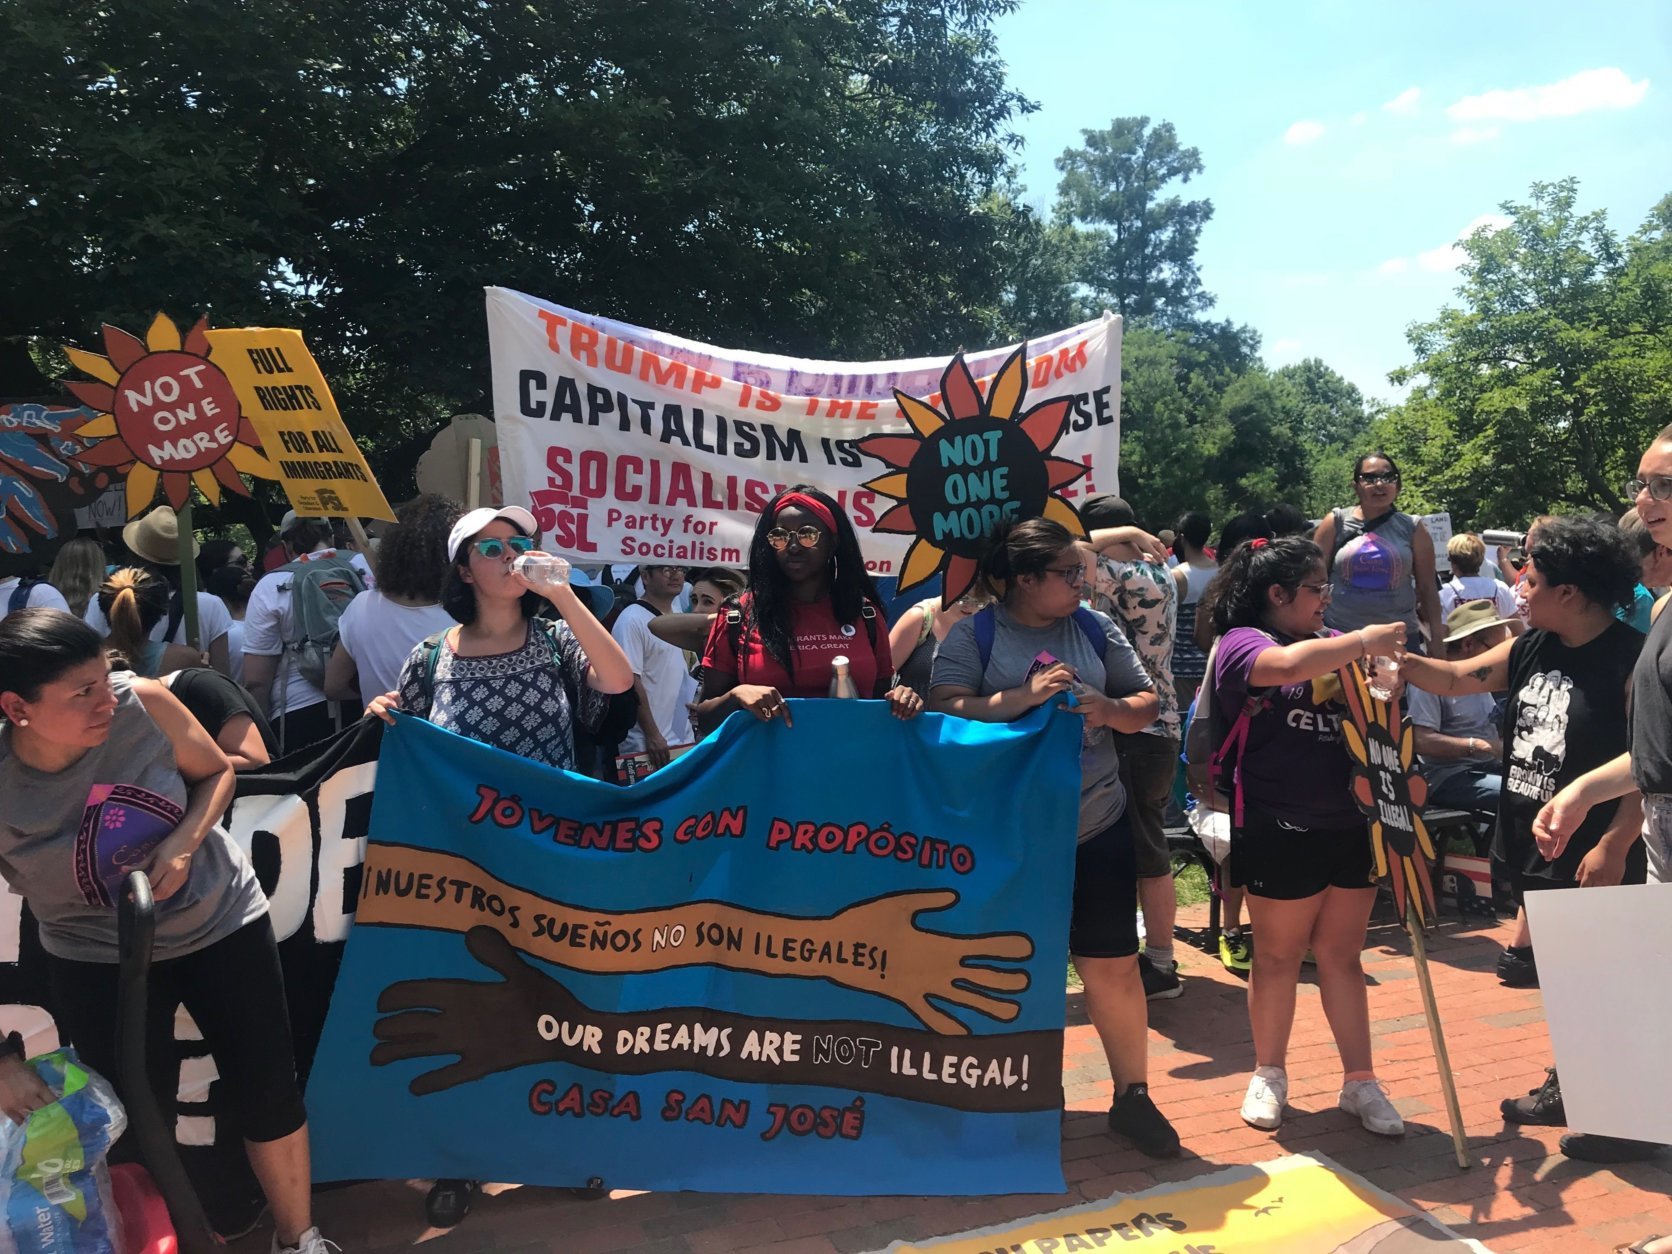 Scenes from the "Families Belong Together" march and rally. (WTOP/Dick Uliano)